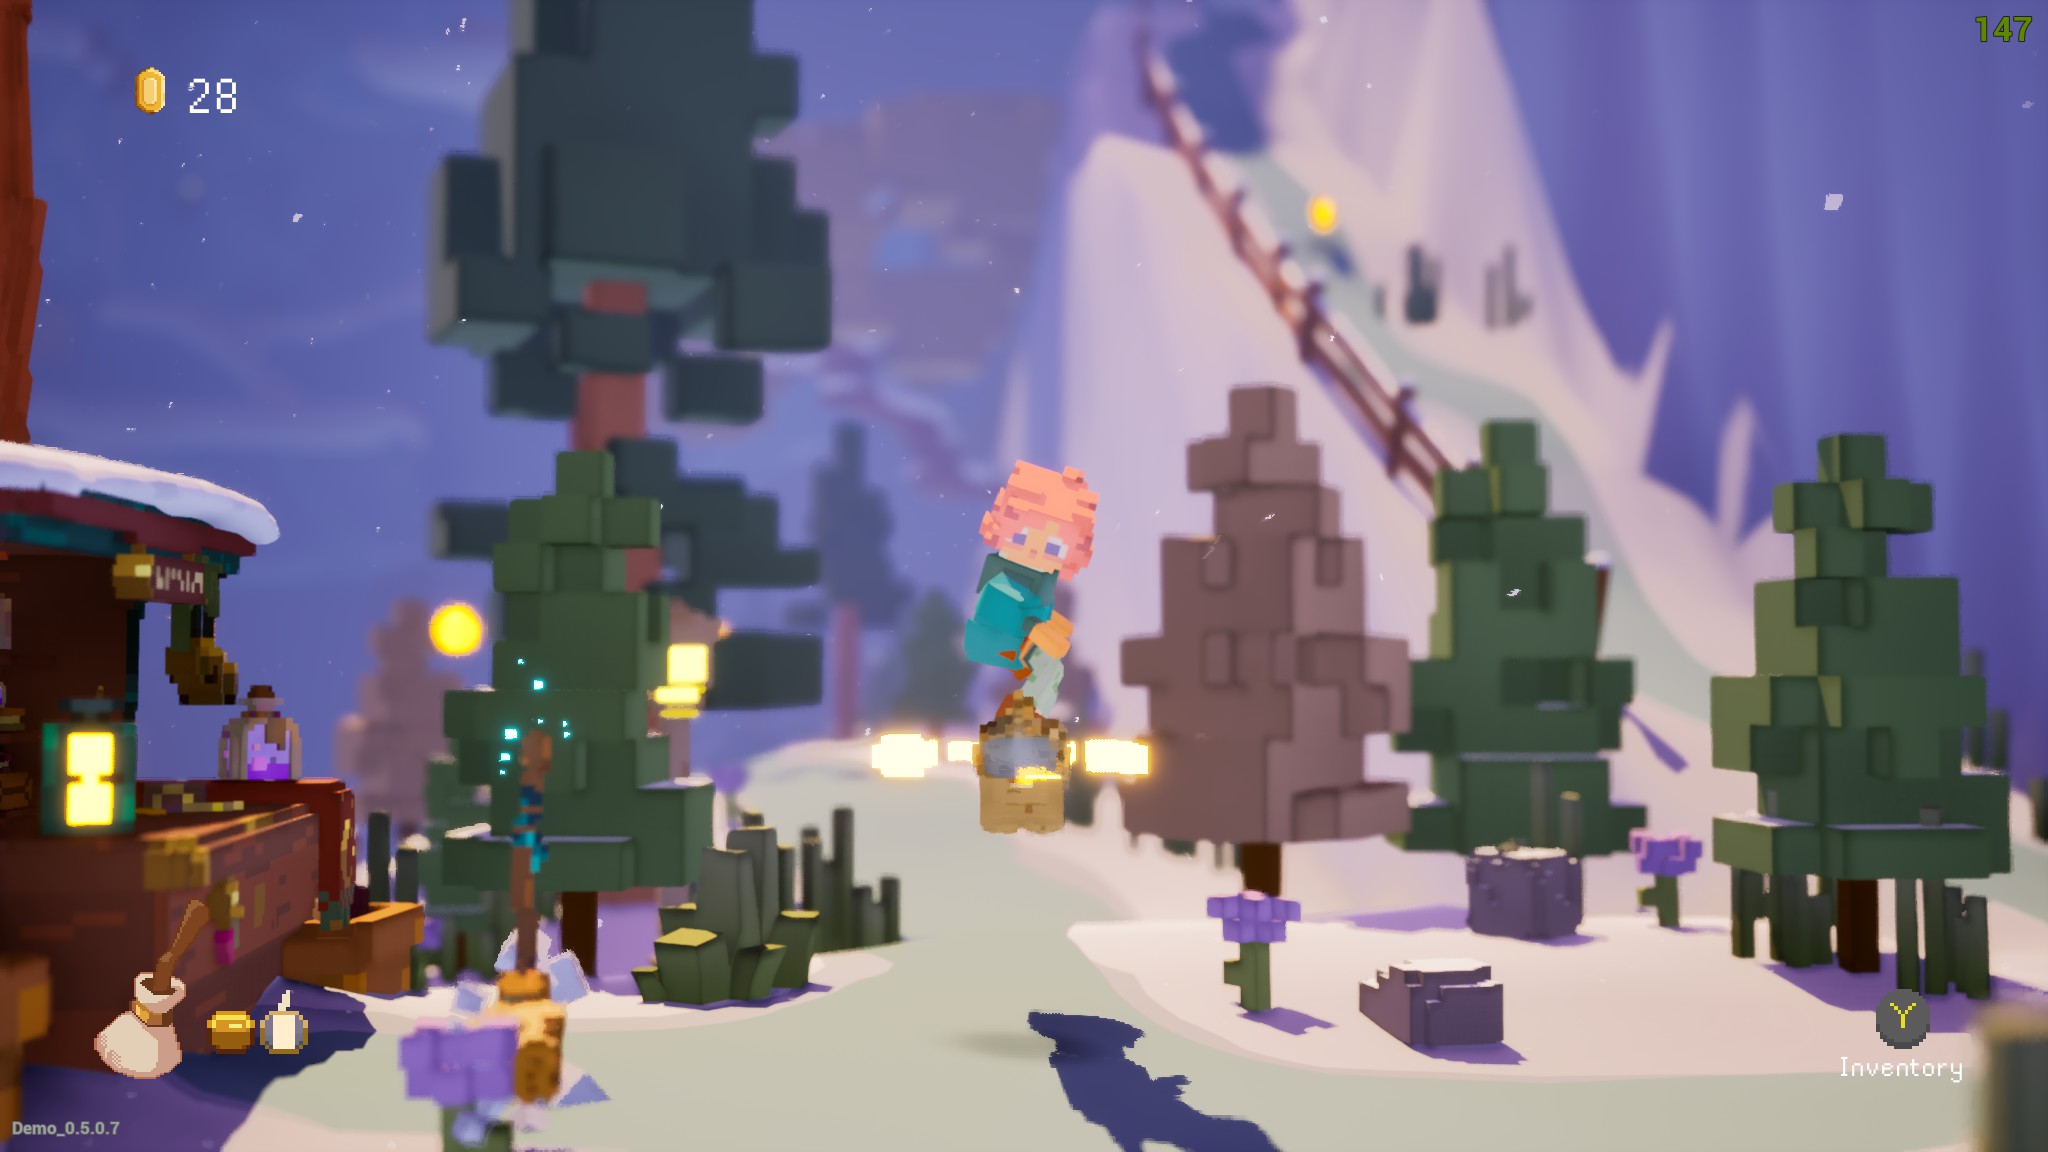 A 3D voxel world where a young witch skaeboards on a broom around a snowy mountain